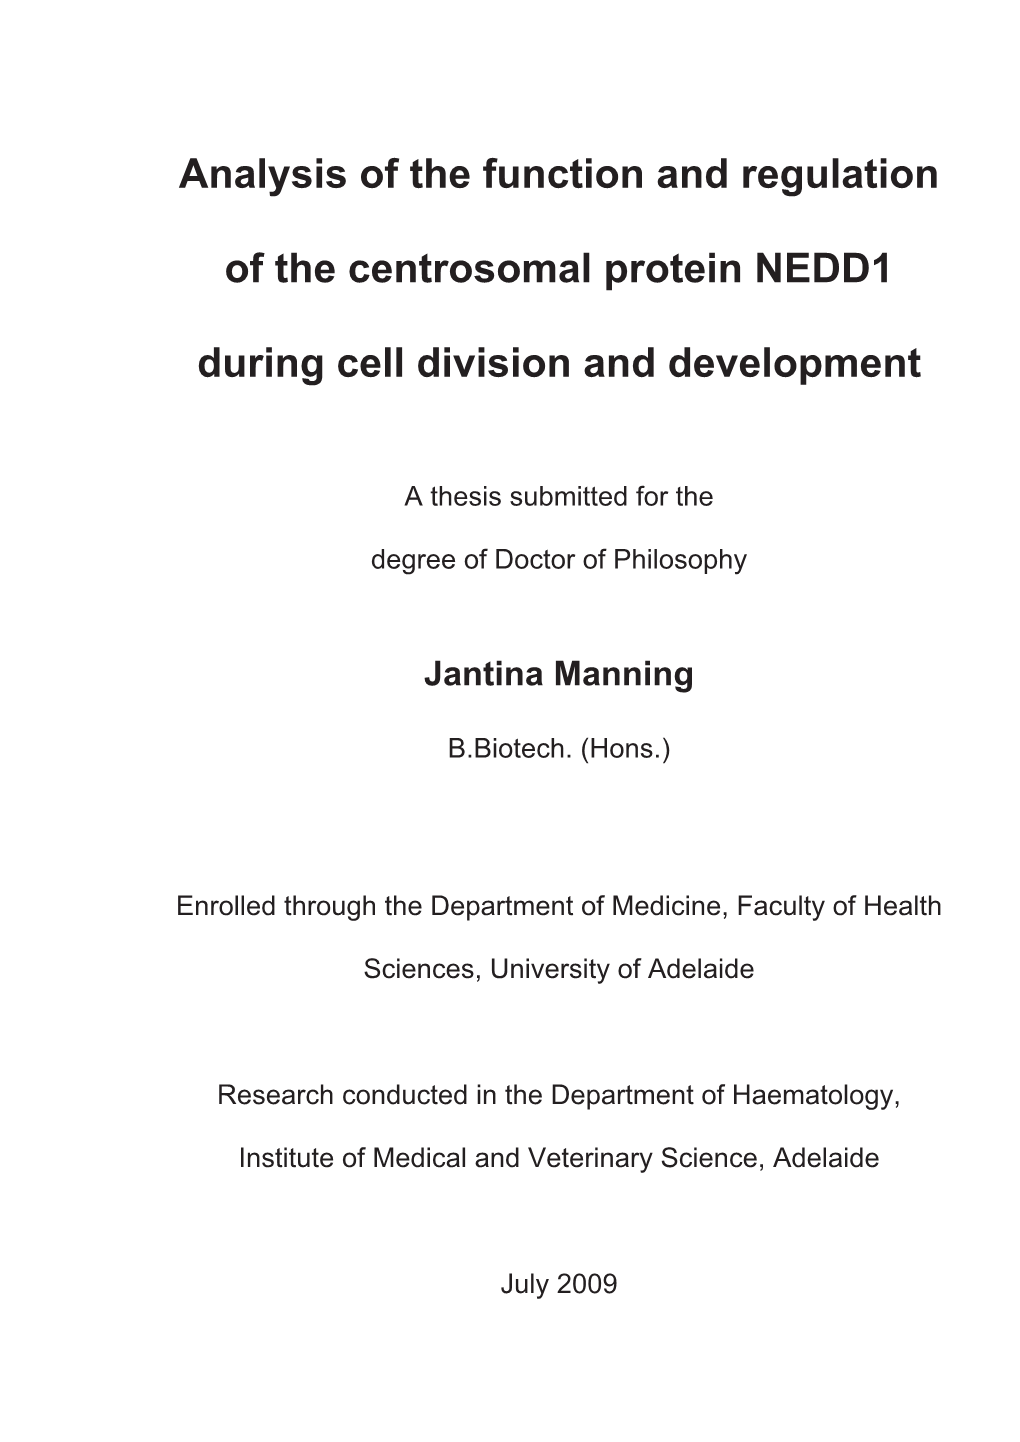 Analysis of the Function and Regulation of the Centrosomal Protein NEDD1